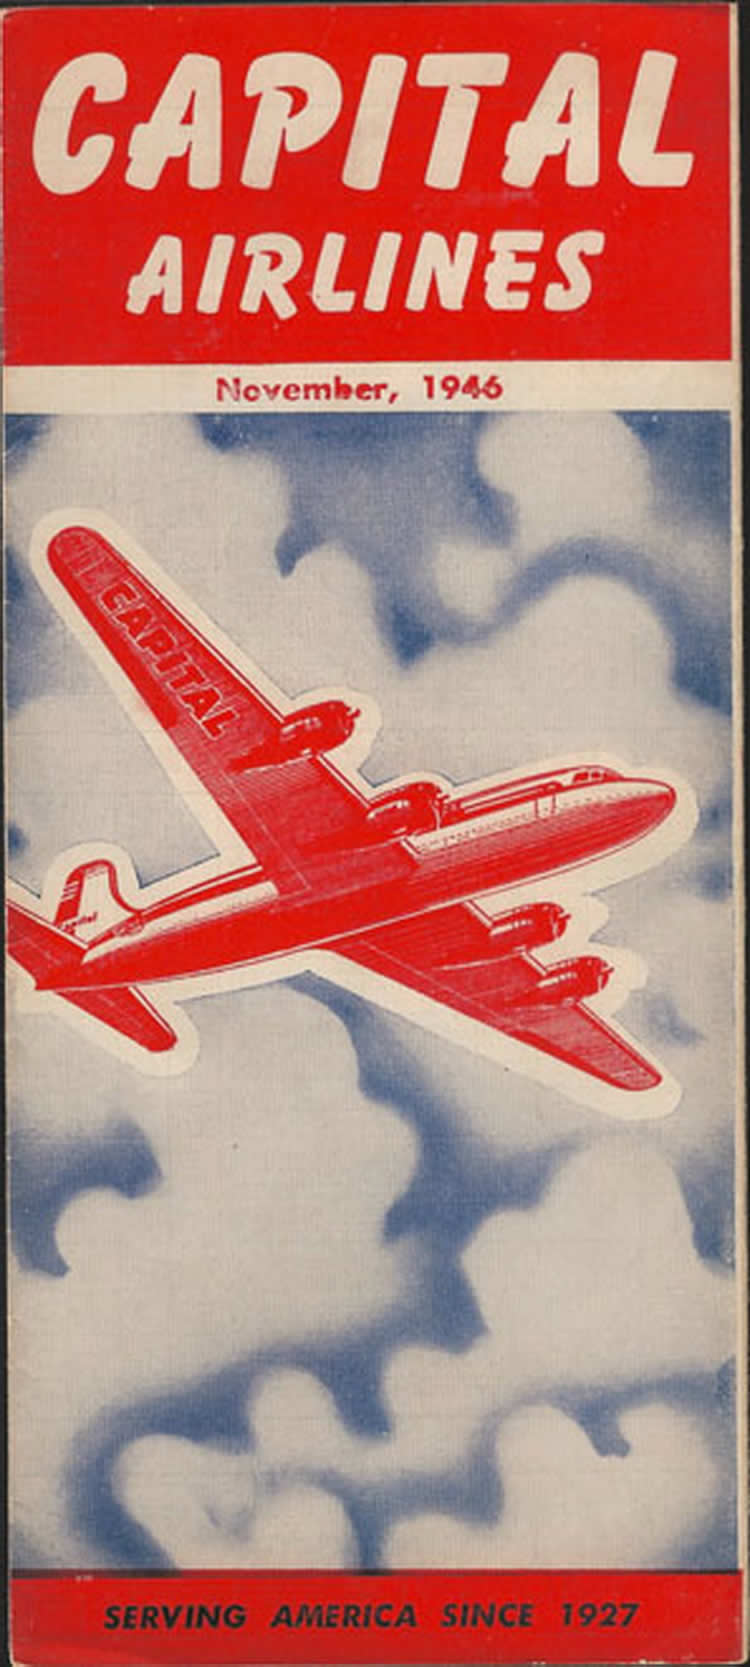 vintage airline timetable for Capital Airlines